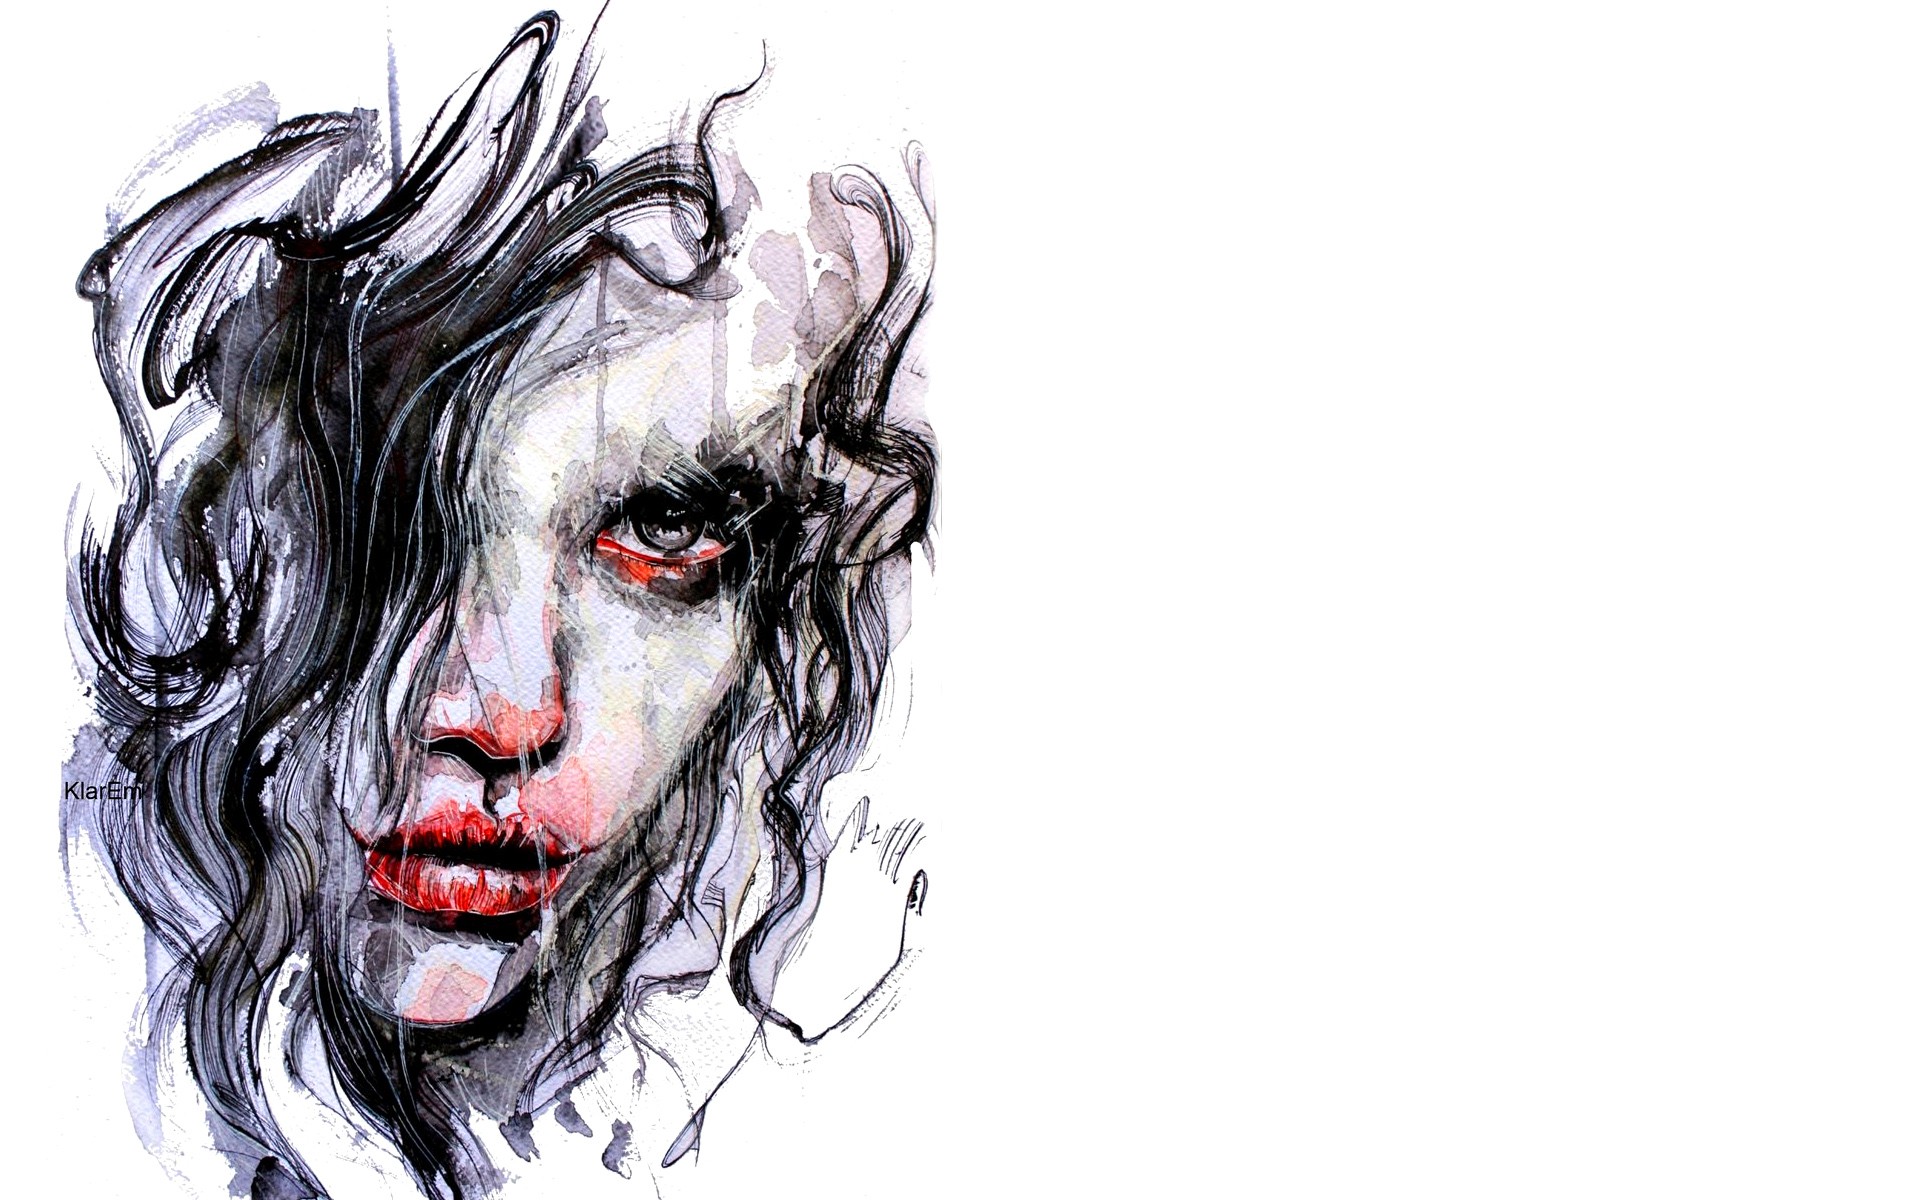 women, artistic, colors, gothic, style, watercolor